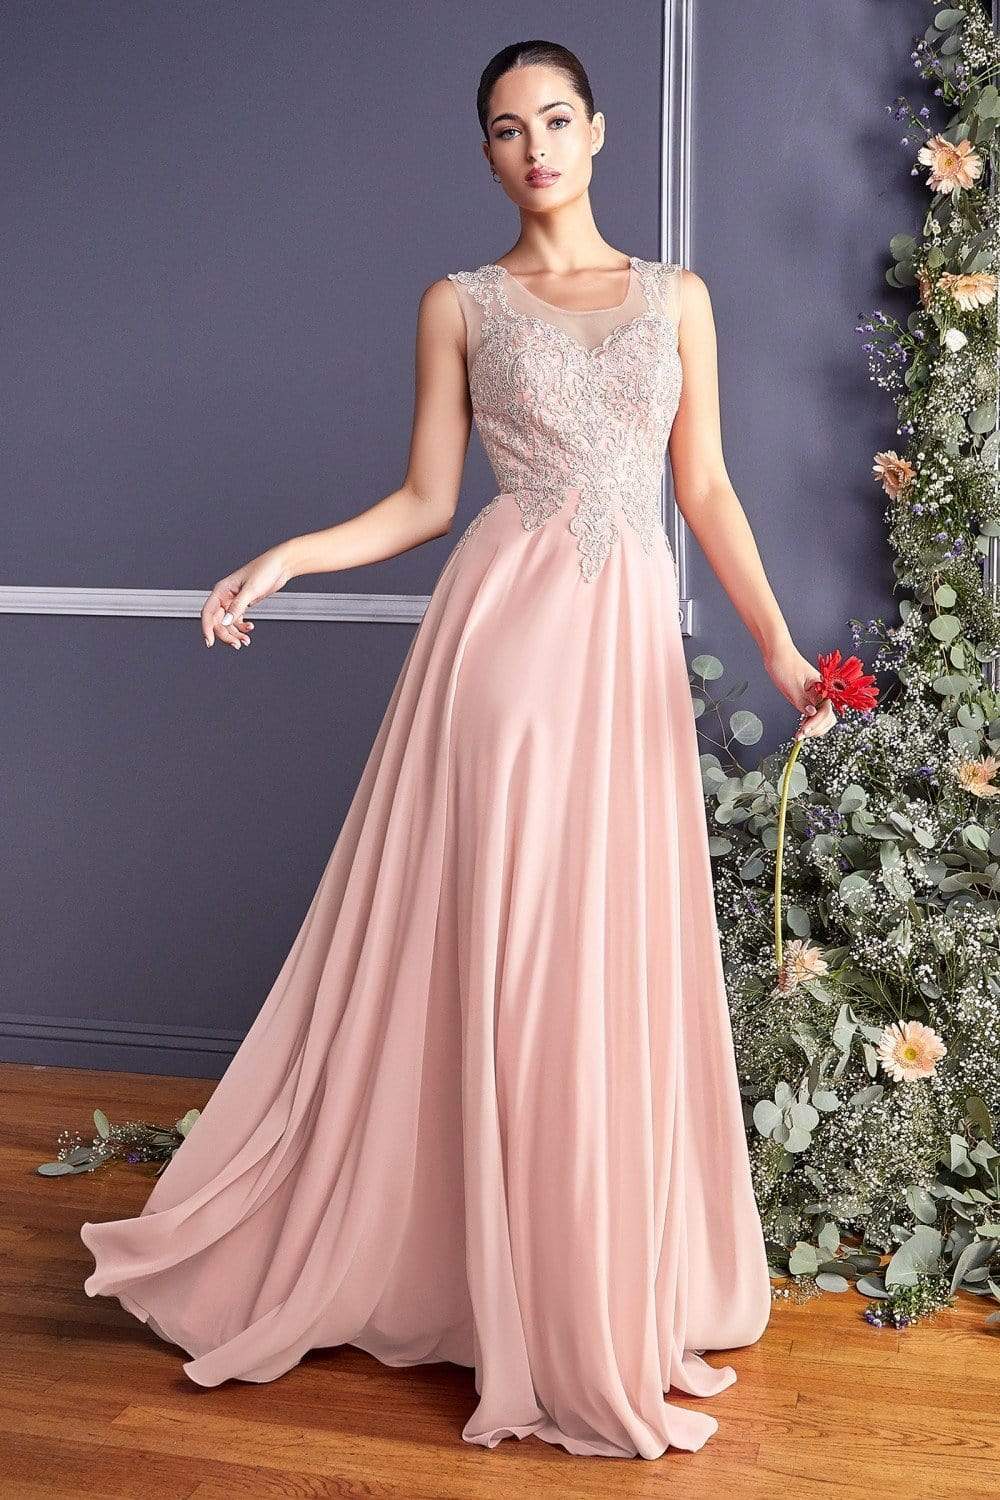 New Arrival: Sparkling Peach Ball Gown Layered Prom Dress With Beads And  Sequins Floor Length Evening Gresses From Lpdqlstudio, $142.65 | DHgate.Com